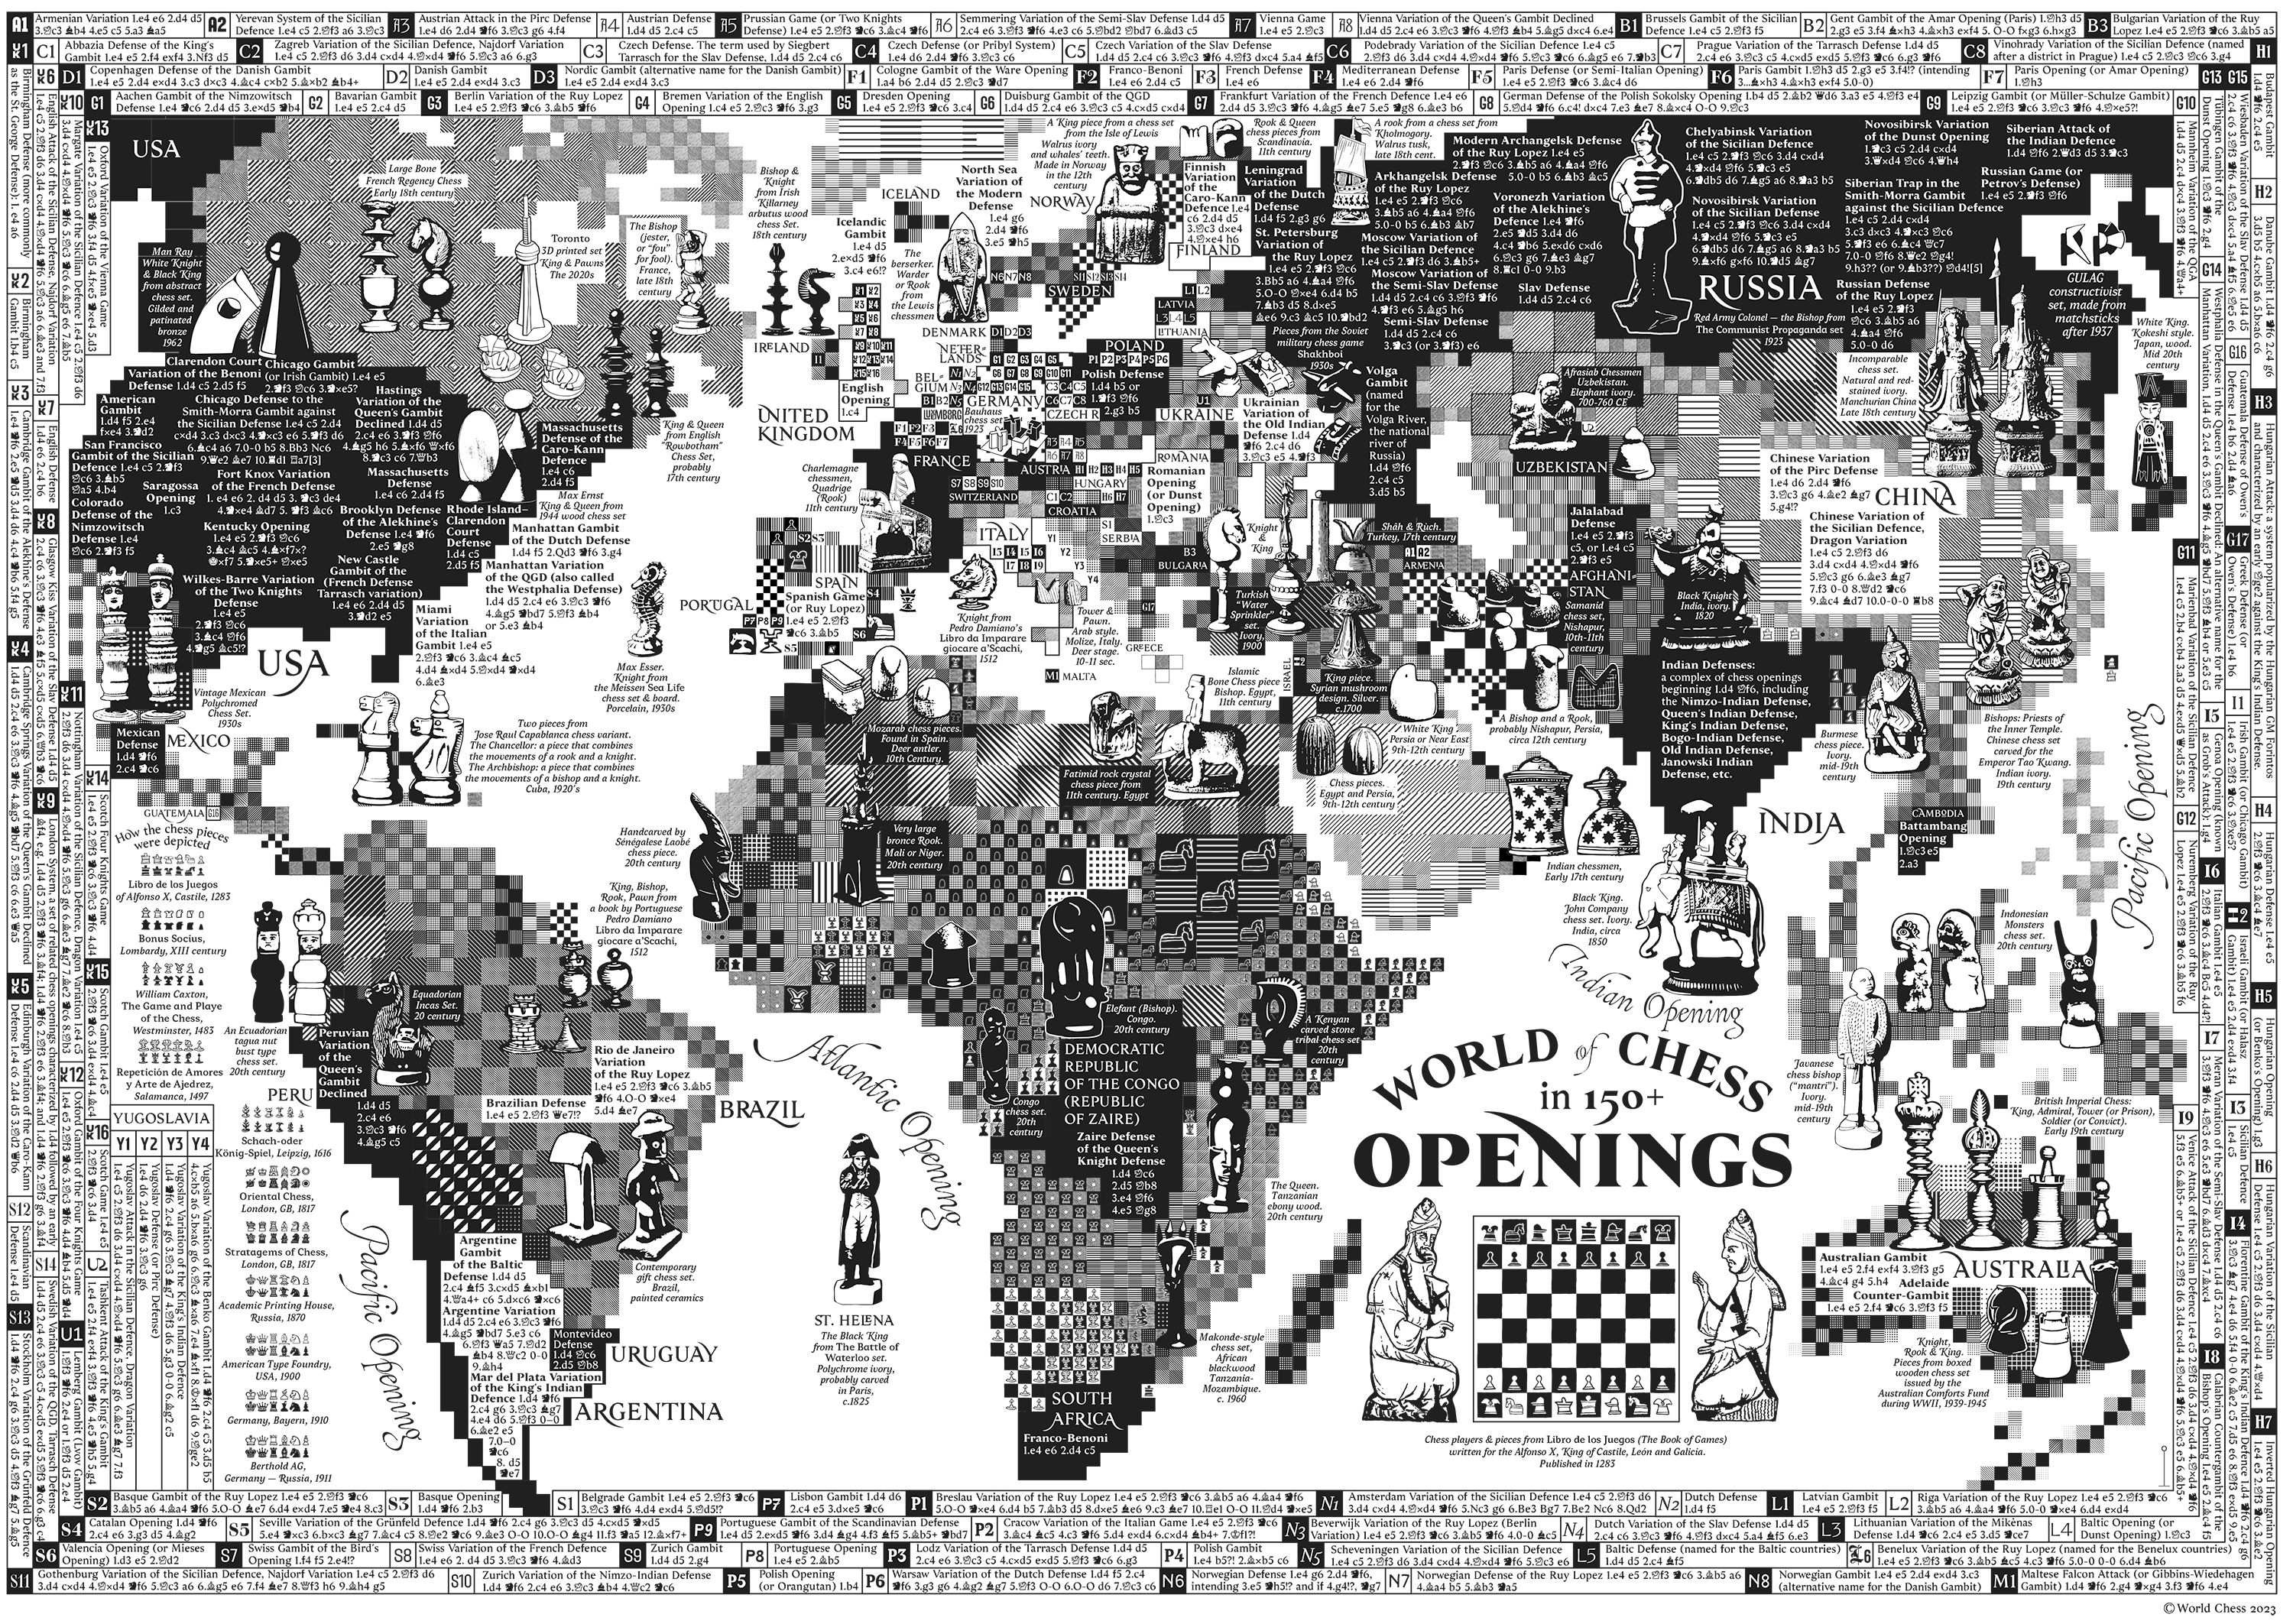 Named openings galore! – Like a road map, only for chess